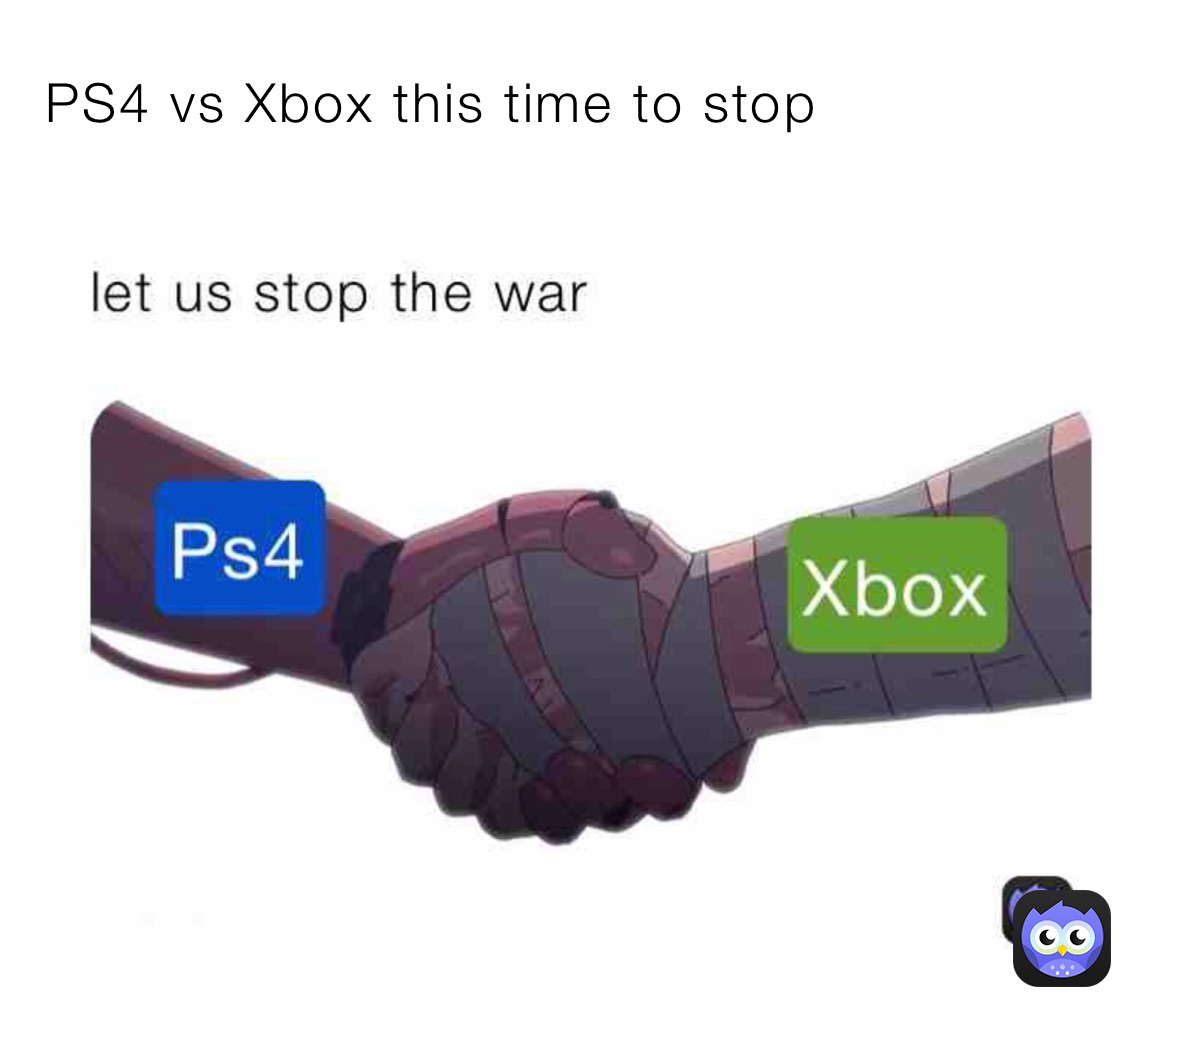 PS4 vs Xbox this time to stop